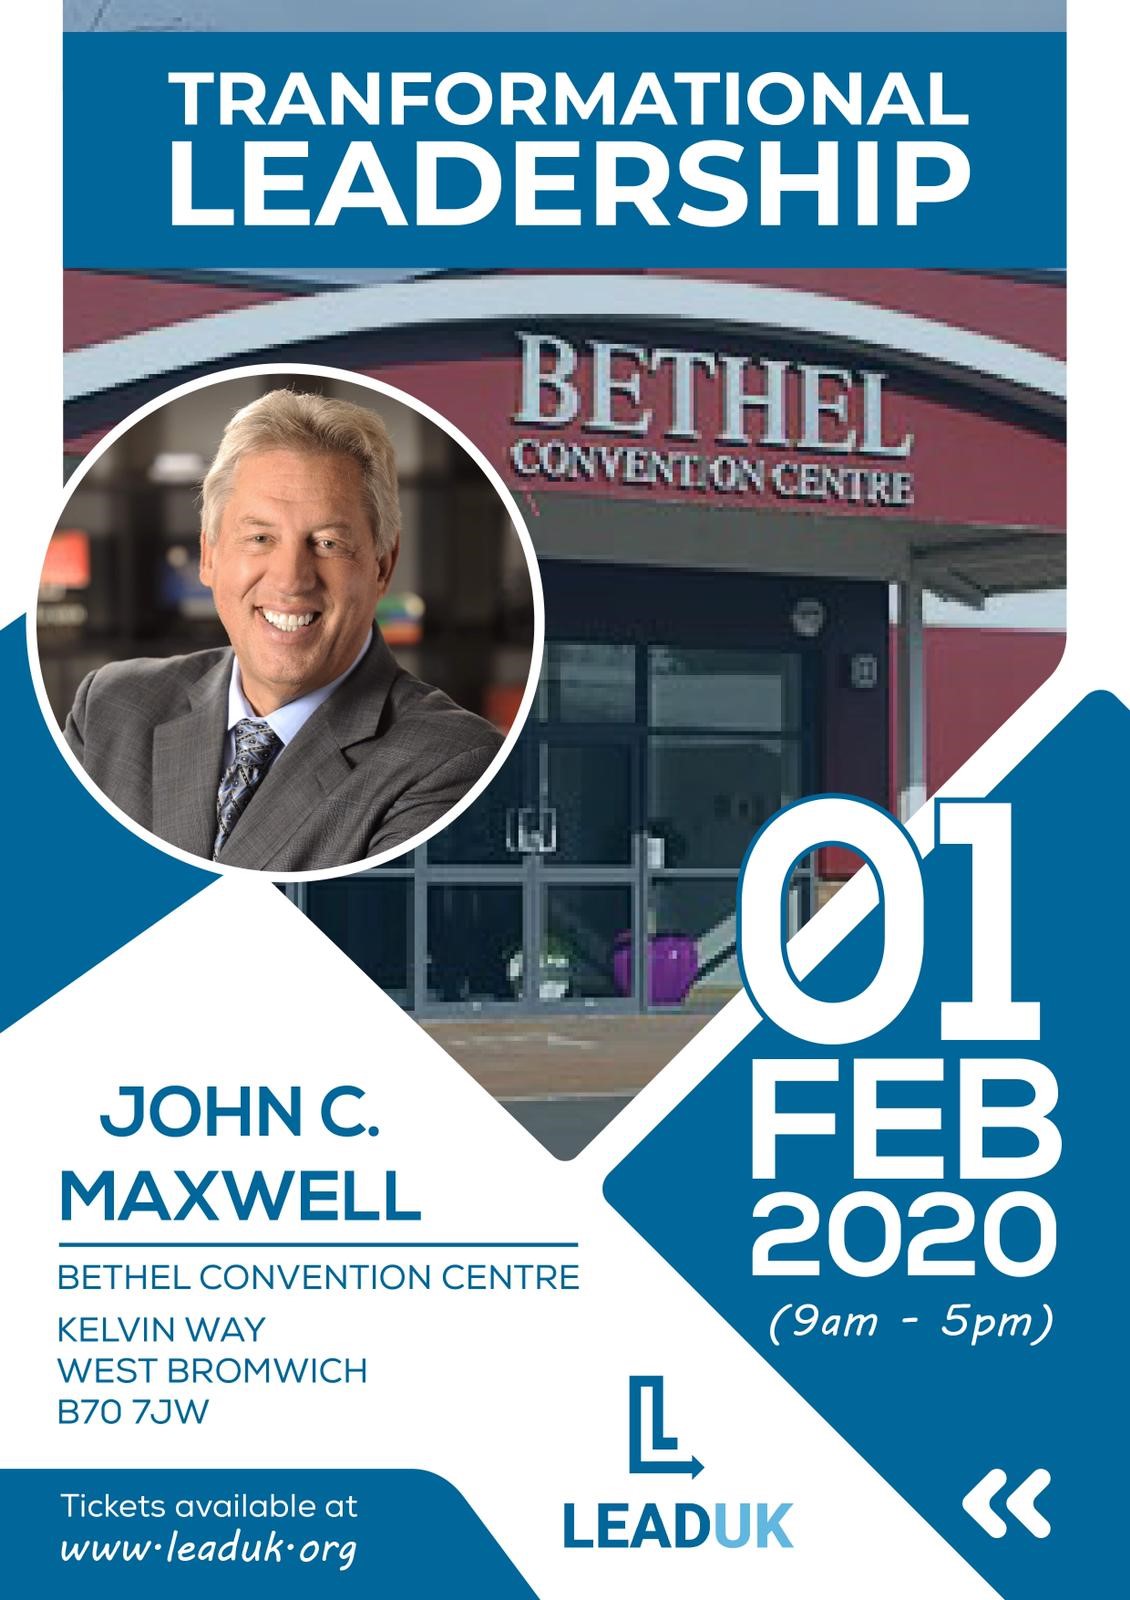 John C. Maxwell Conference - Love Black Country